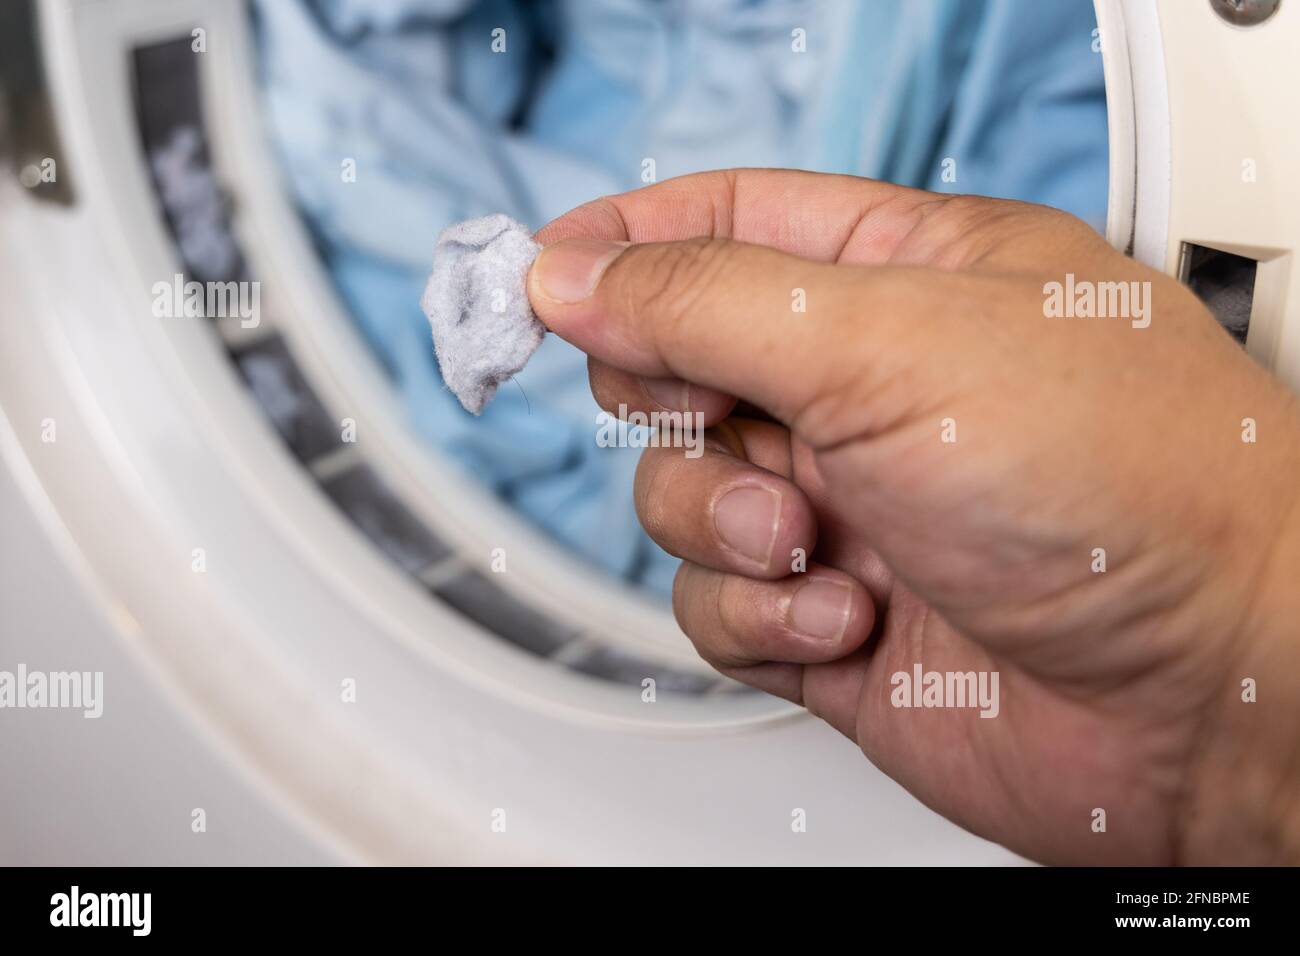 Hand removing lint from fabric trapped on laundry dryer filter Stock Photo